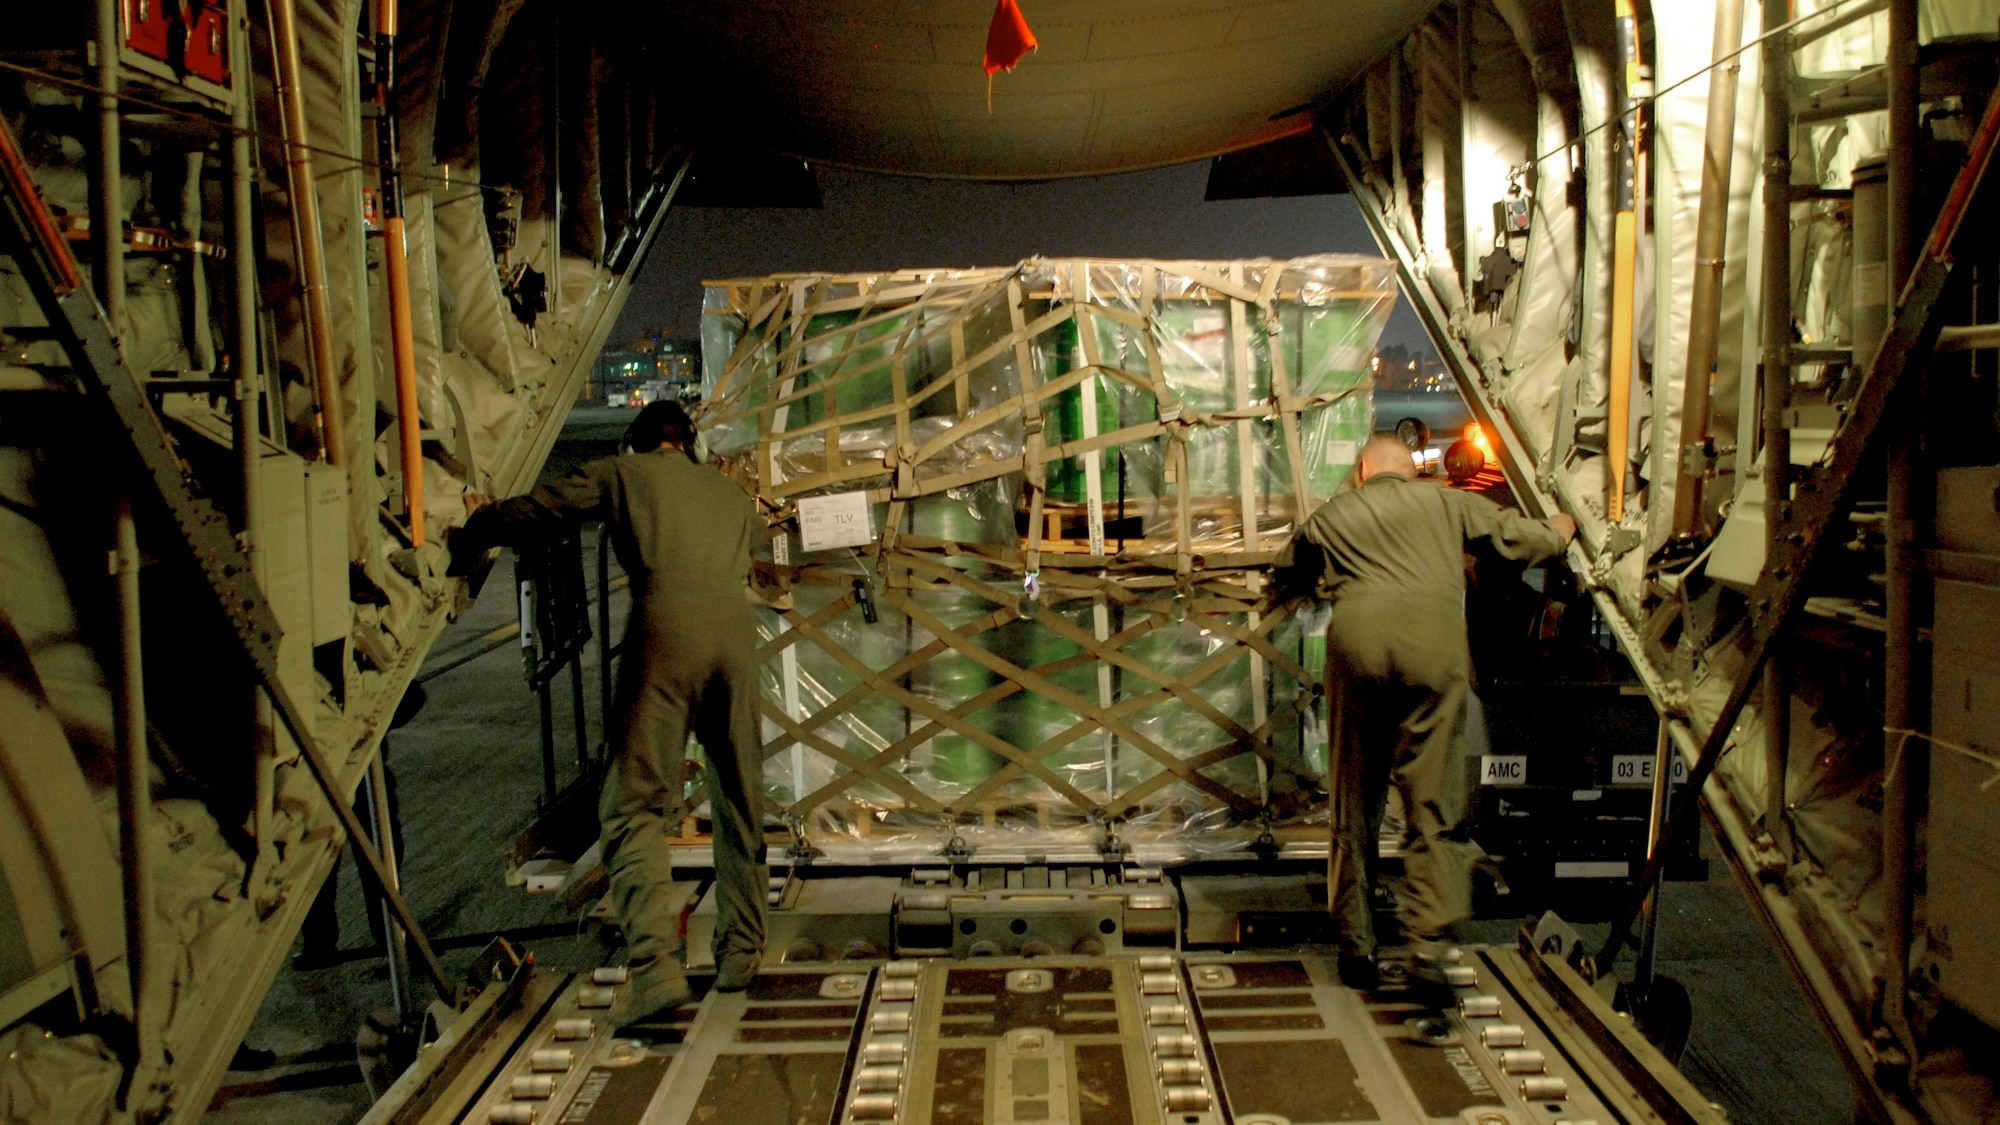 TEL AVIV, Israel – Master Sgt. Jason Kunkel and Airman 1st Class Ryan Caves, load masters for the 37th Airlift Squadron based at Ramstein Air Base, Germany, off load approximately 13.5 tons of fire suppression agent from a C-130J aircraft onto an Israeli K-loader Sunday, Dec. 5, 2010, at Tel Aviv International Airport. So far the U.S. has donated 30,000 liters of fire retardant, with plans to deliver 60,000 more over the next three days to aid firefighting efforts in Israel. (U.S. Air Force photo by Capt. John Ross)